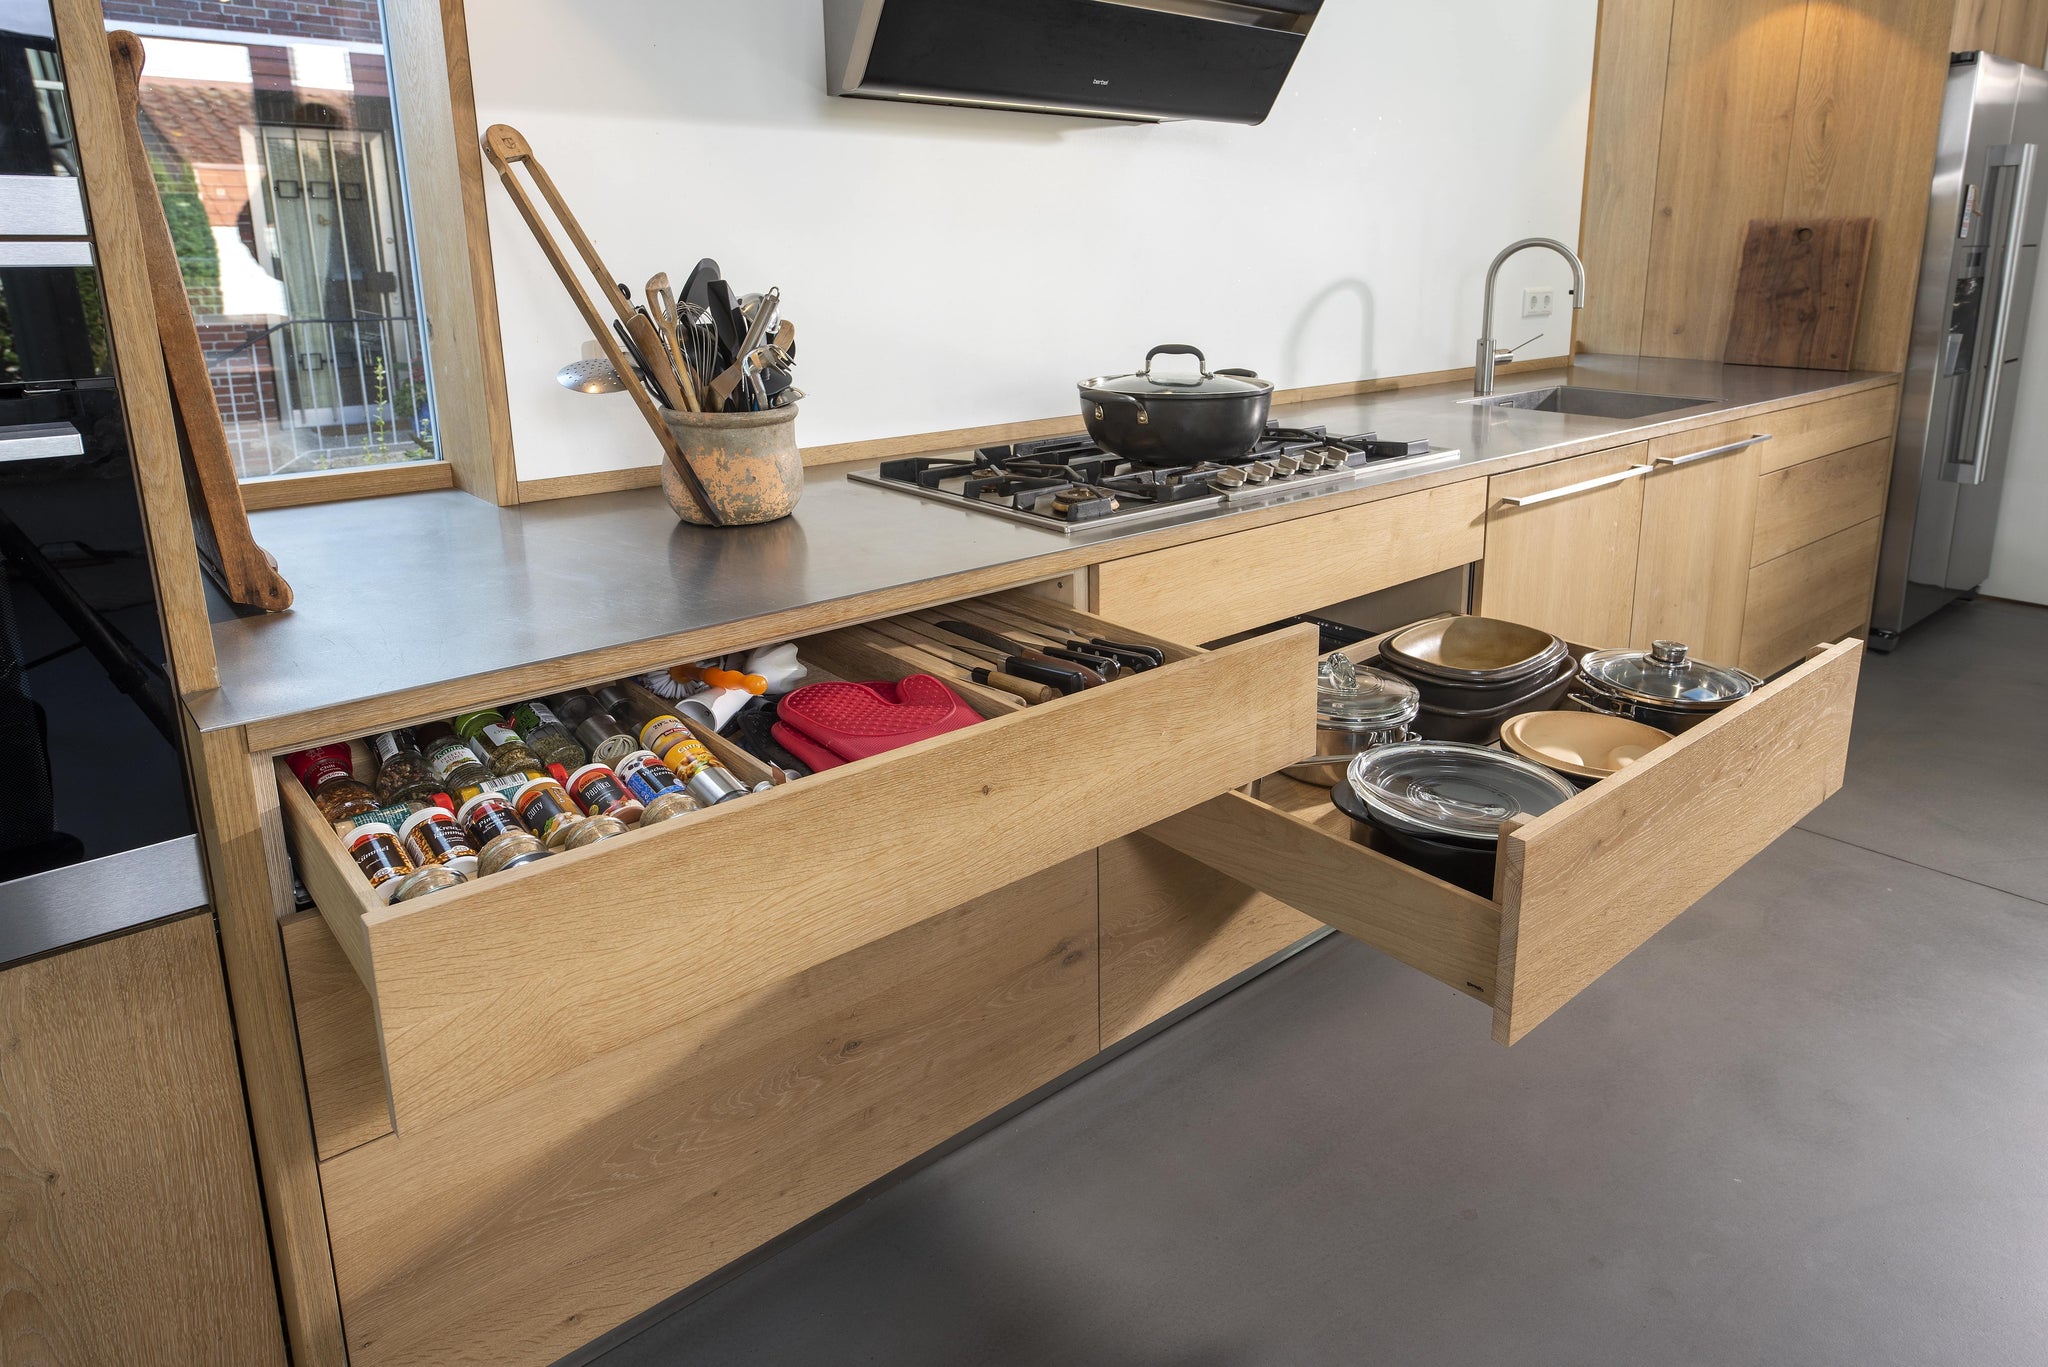 Everything has its place here - order in the kitchen is half the battle of life. These drawer divisions are adapted to the owners’ automatisms!